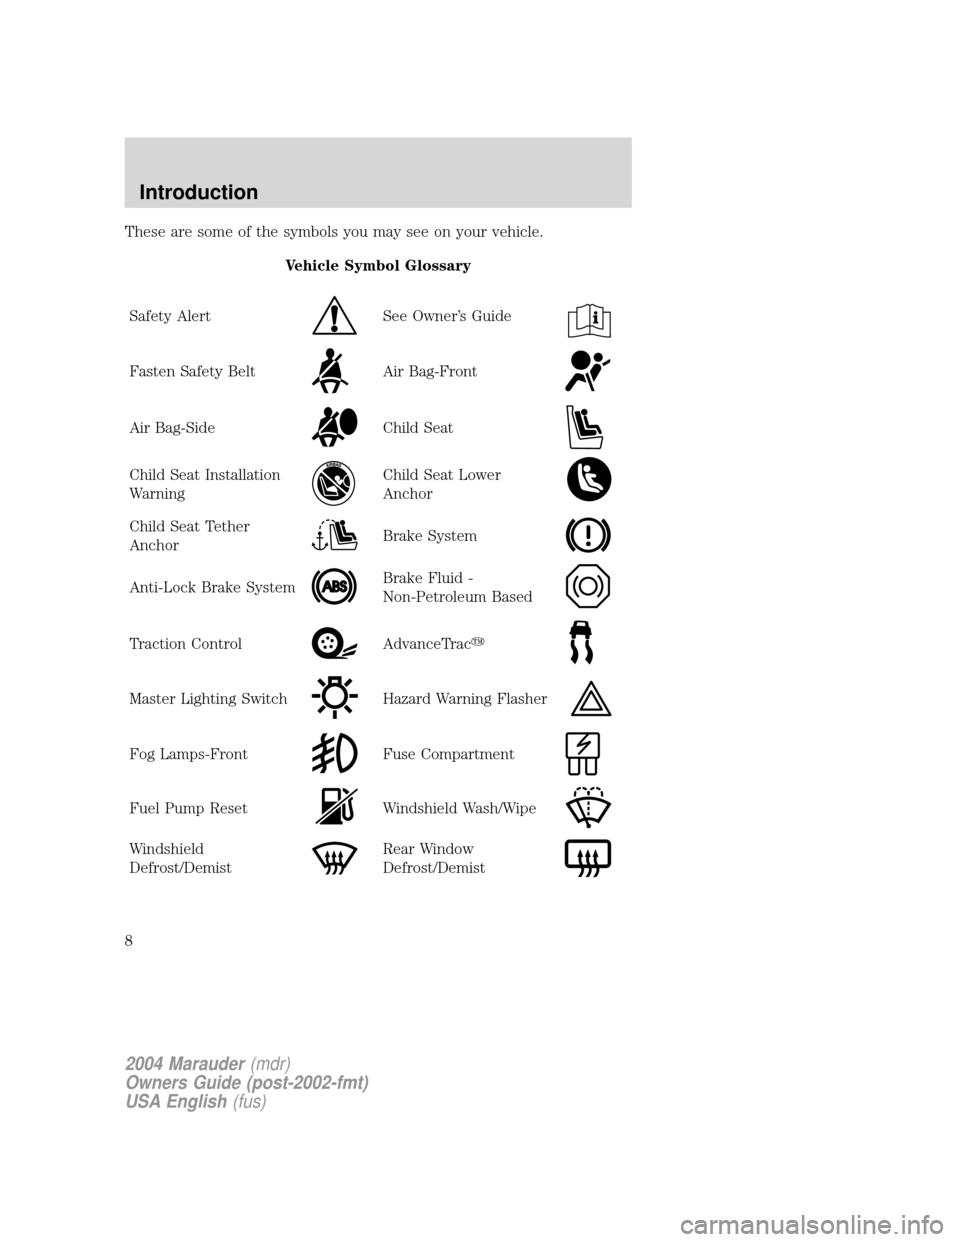 Mercury Marauder 2004  Owners Manuals These are some of the symbols you may see on your vehicle.
Vehicle Symbol Glossary
Safety Alert
See Owners Guide
Fasten Safety BeltAir Bag-Front
Air Bag-SideChild Seat
Child Seat Installation
Warning